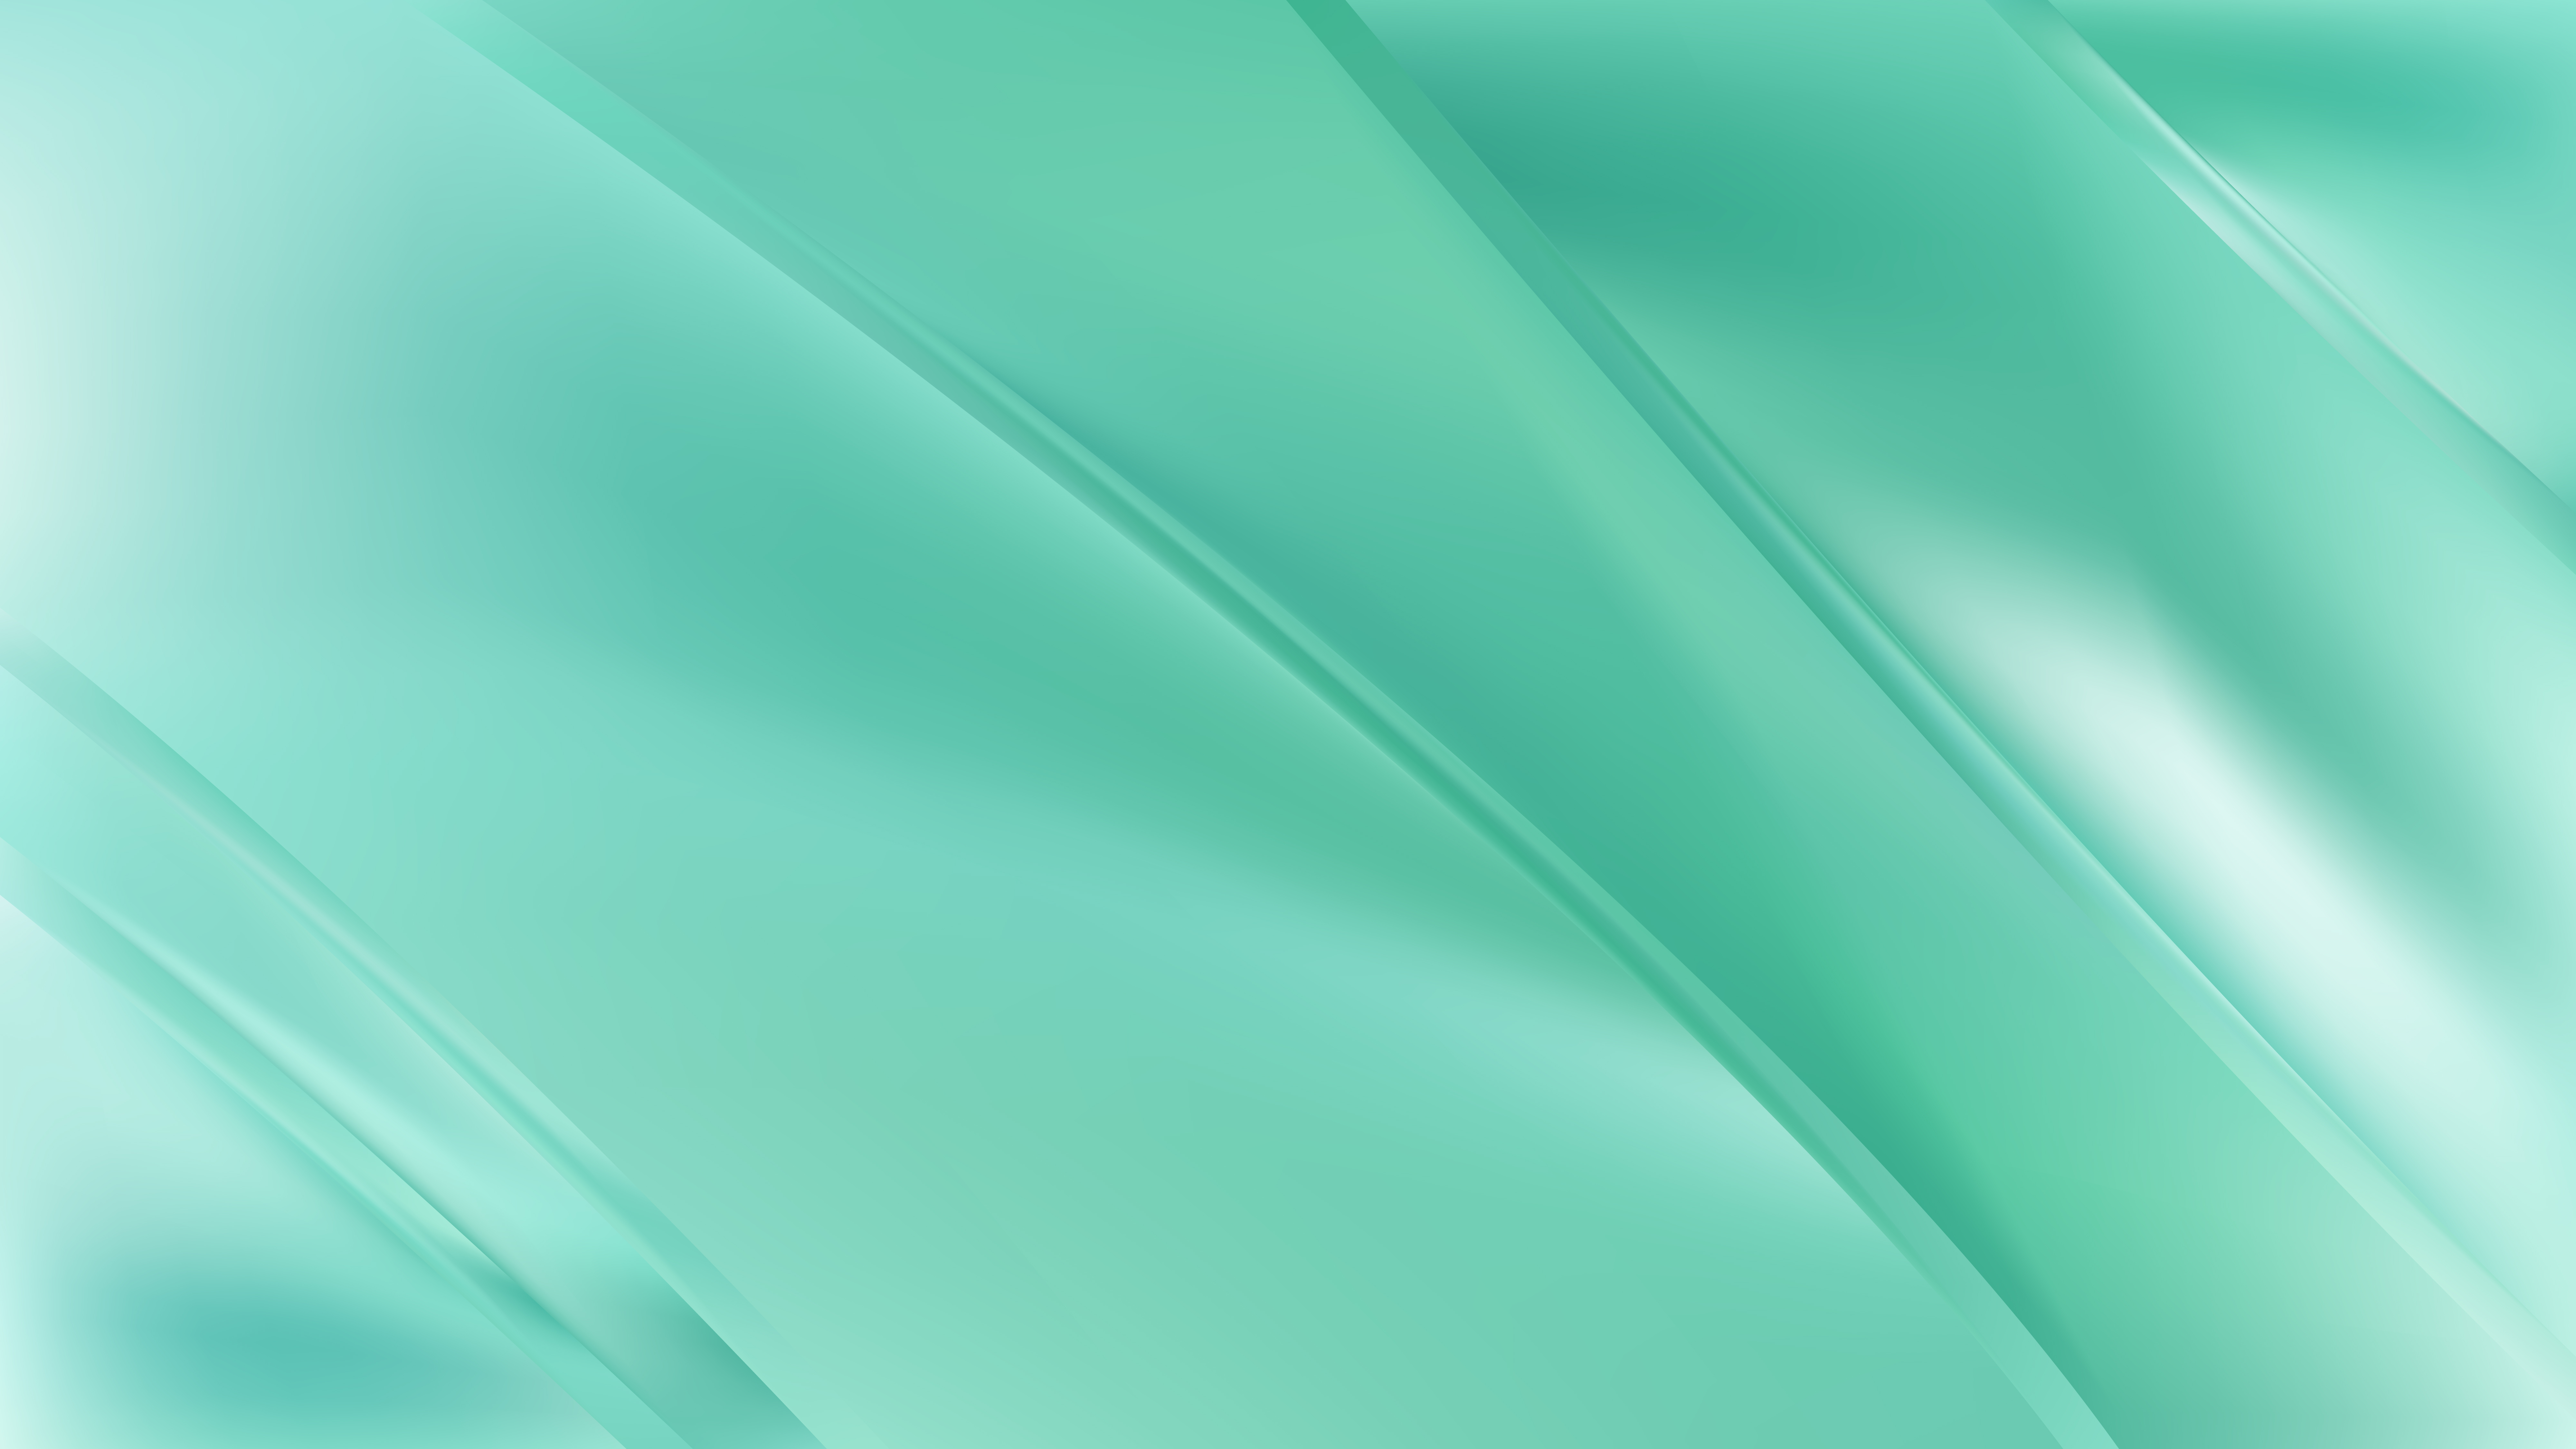 Free Abstract Mint Green Diagonal Shiny Lines Background Design